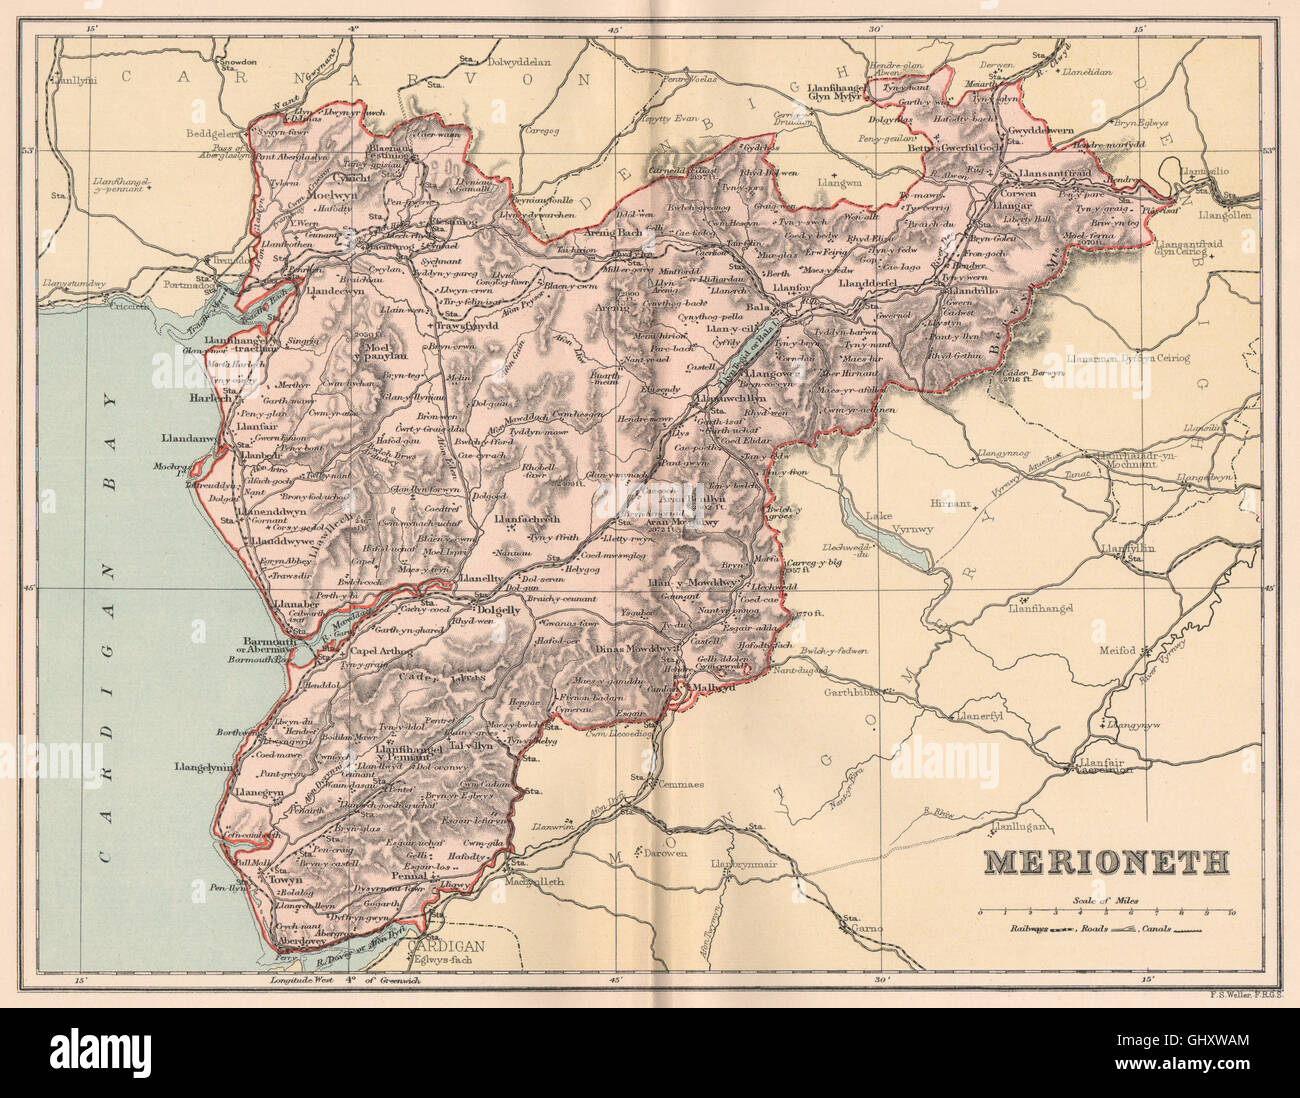 MERIONETHSHIRE. Antique county map. Wales, 1893 Stock Photo